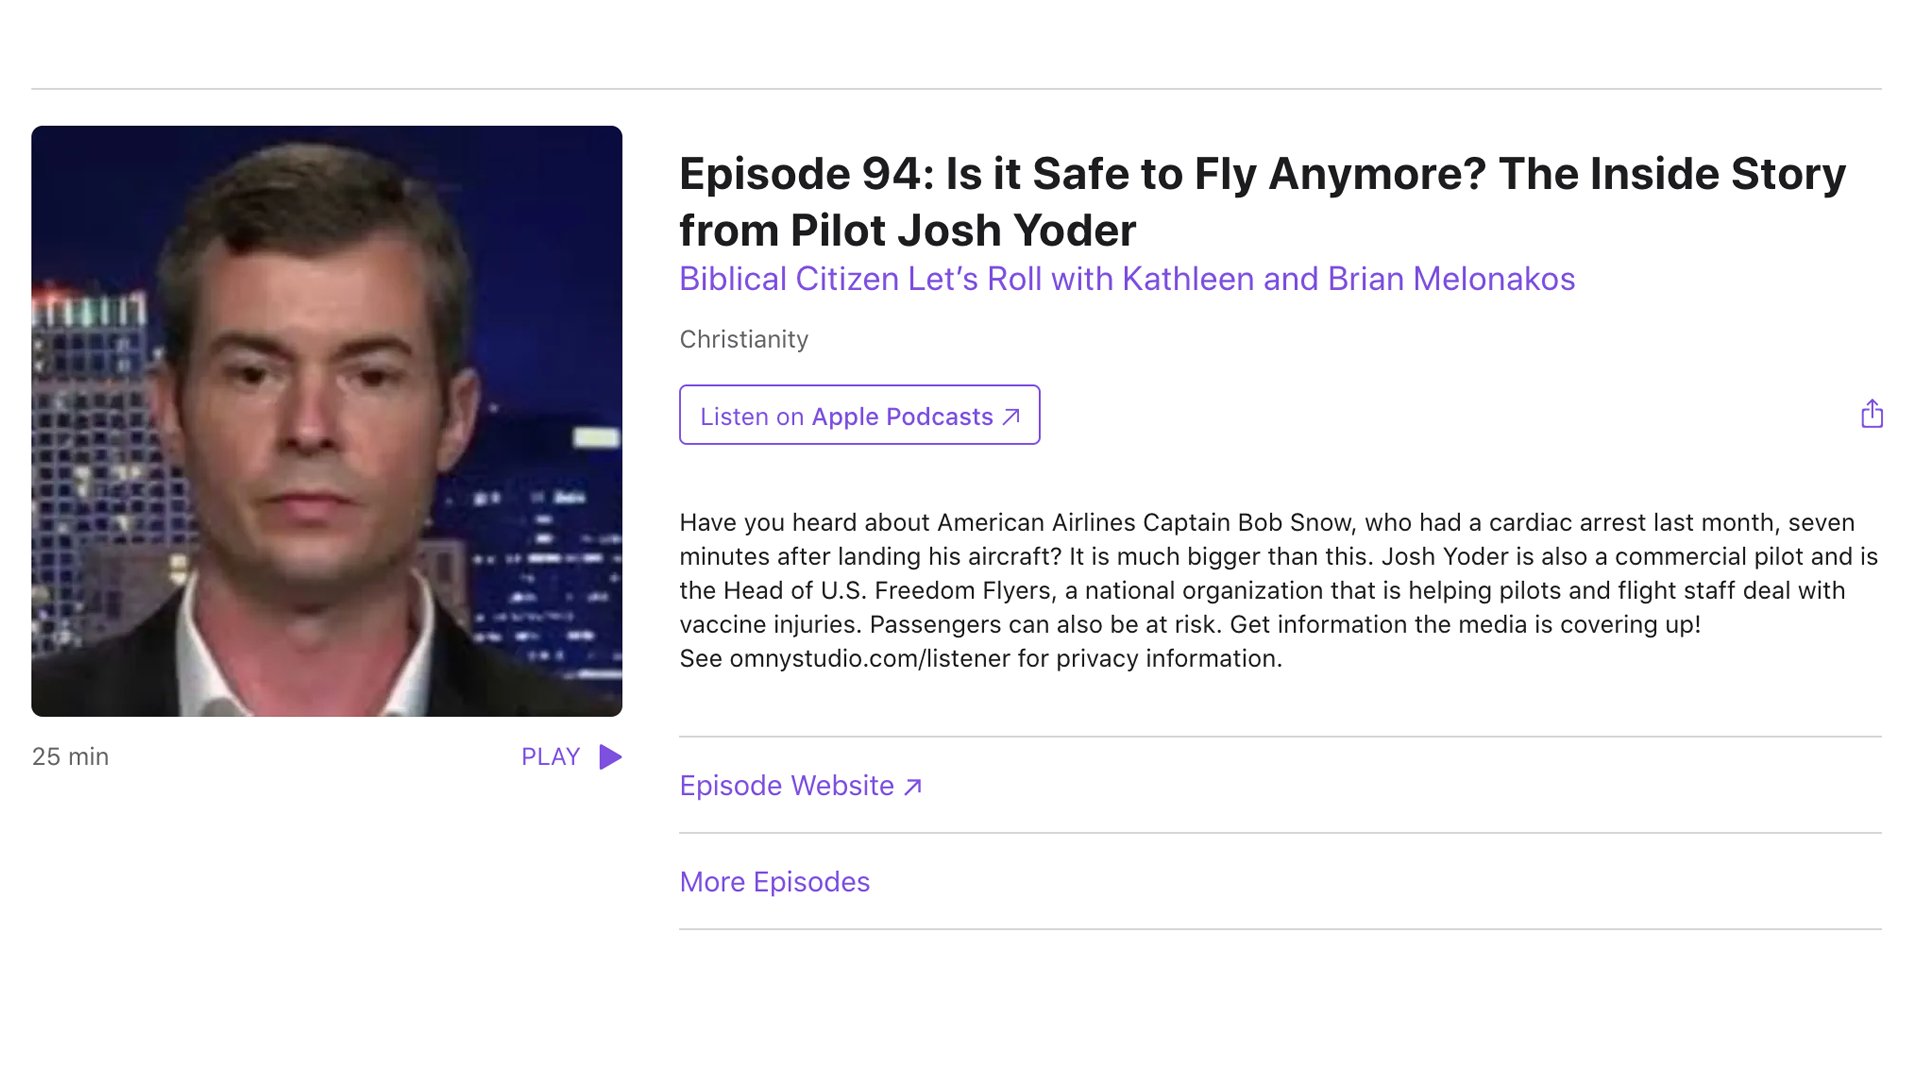 Episode 94: Is it Safe to Fly Anymore? The Inside Story from Pilot Josh Yoder